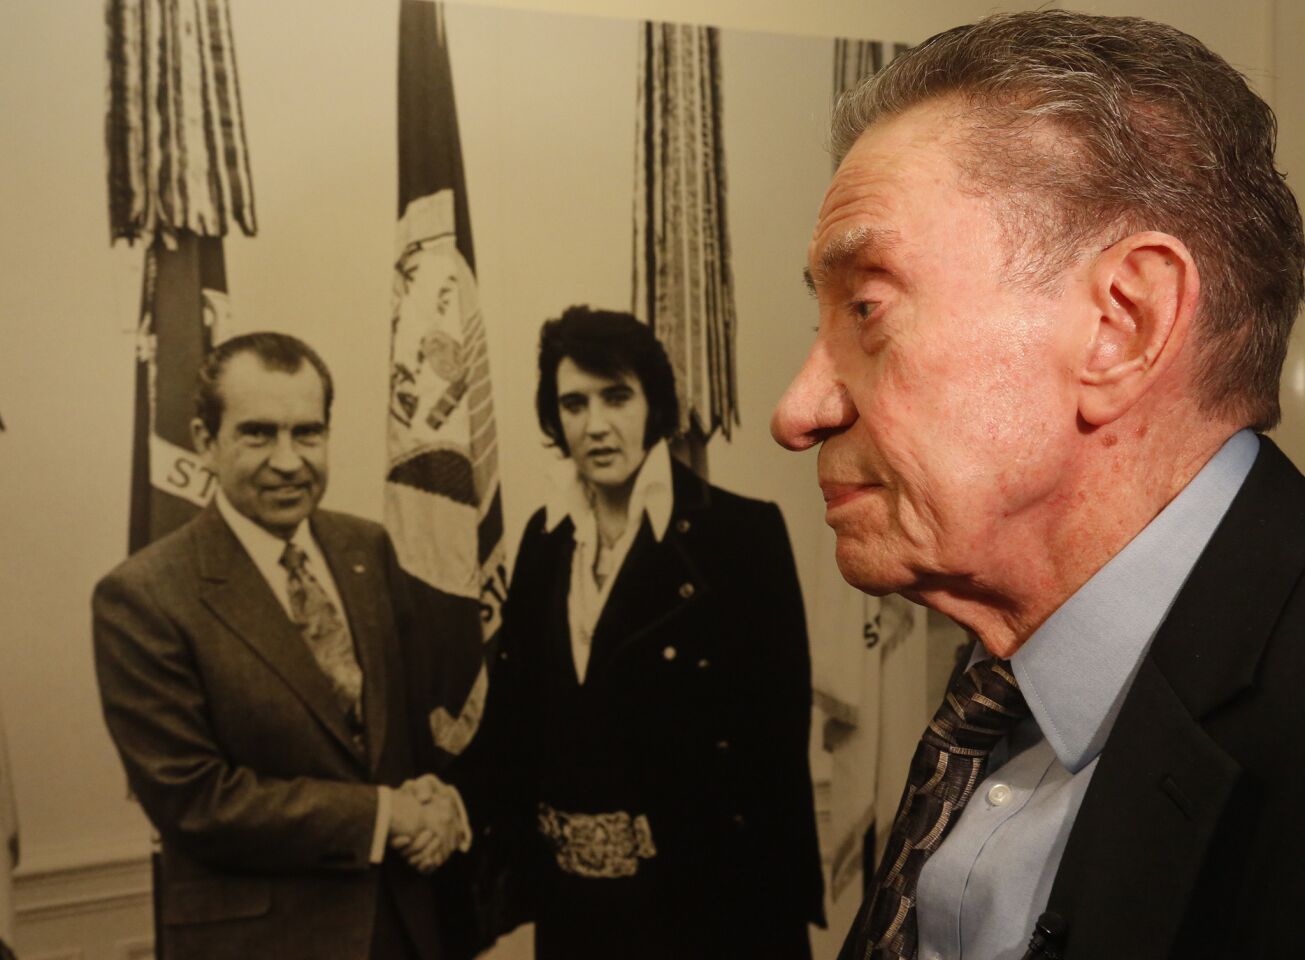 Richard Nixon's brother, Ed Nixon, walks past a photo of the president with Elvis Presley at the White House in 1970 during the reopening of the Nixon library in Yorba Linda.